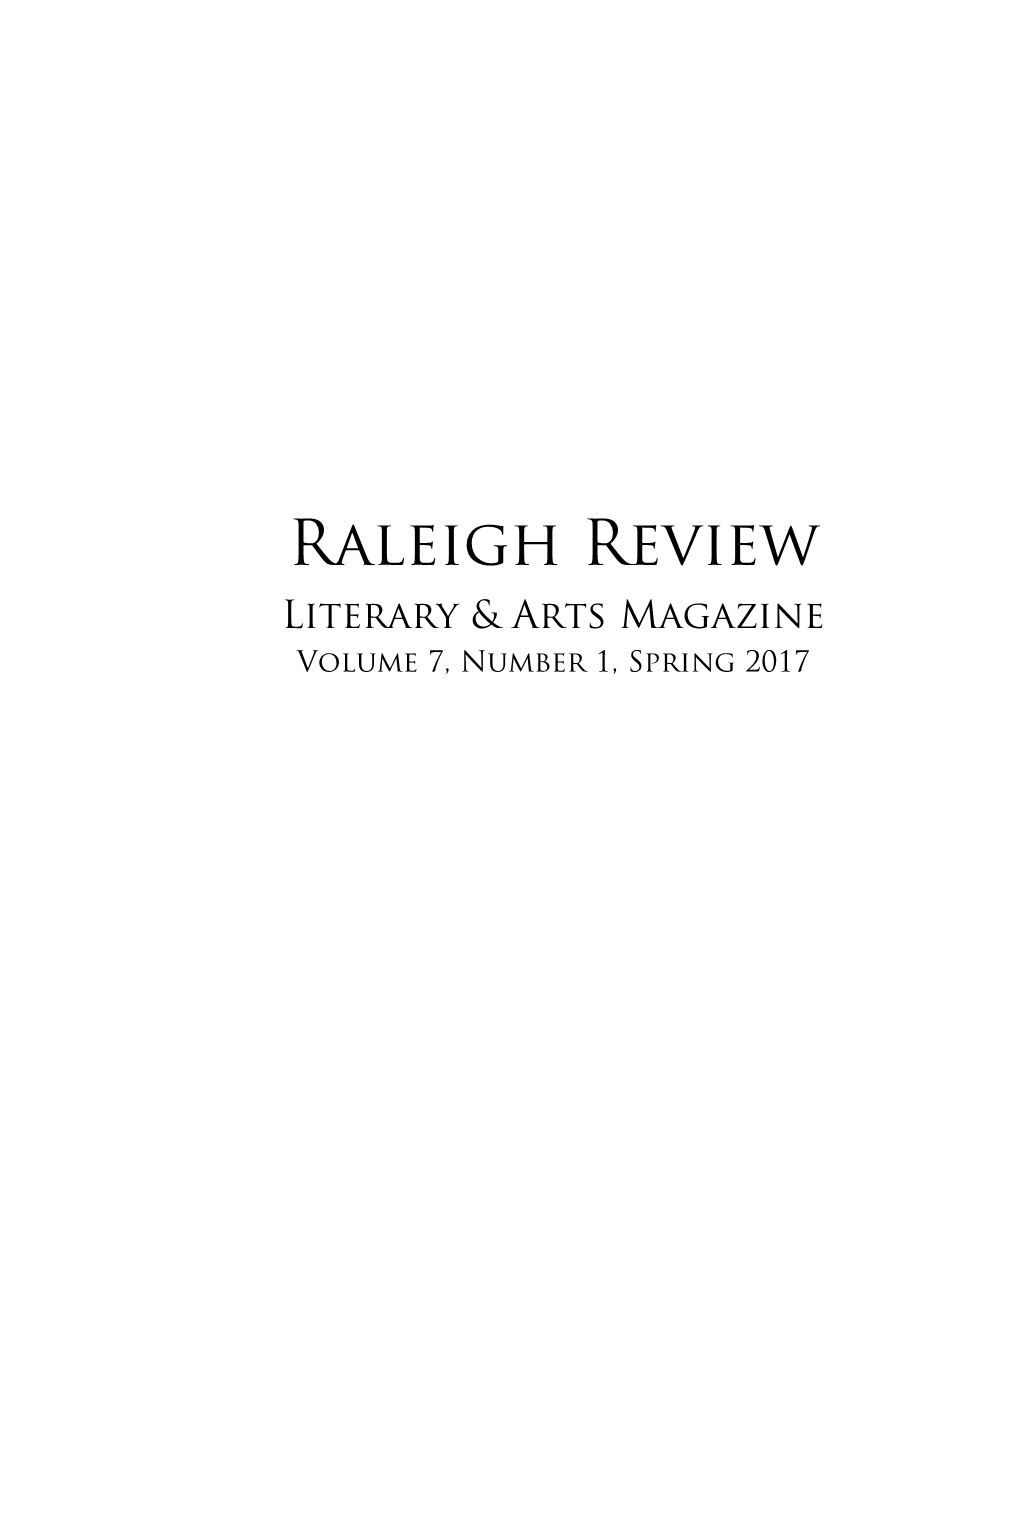 Raleigh Review Literary & Arts Magazine Volume 7, Number 1, Spring 2017